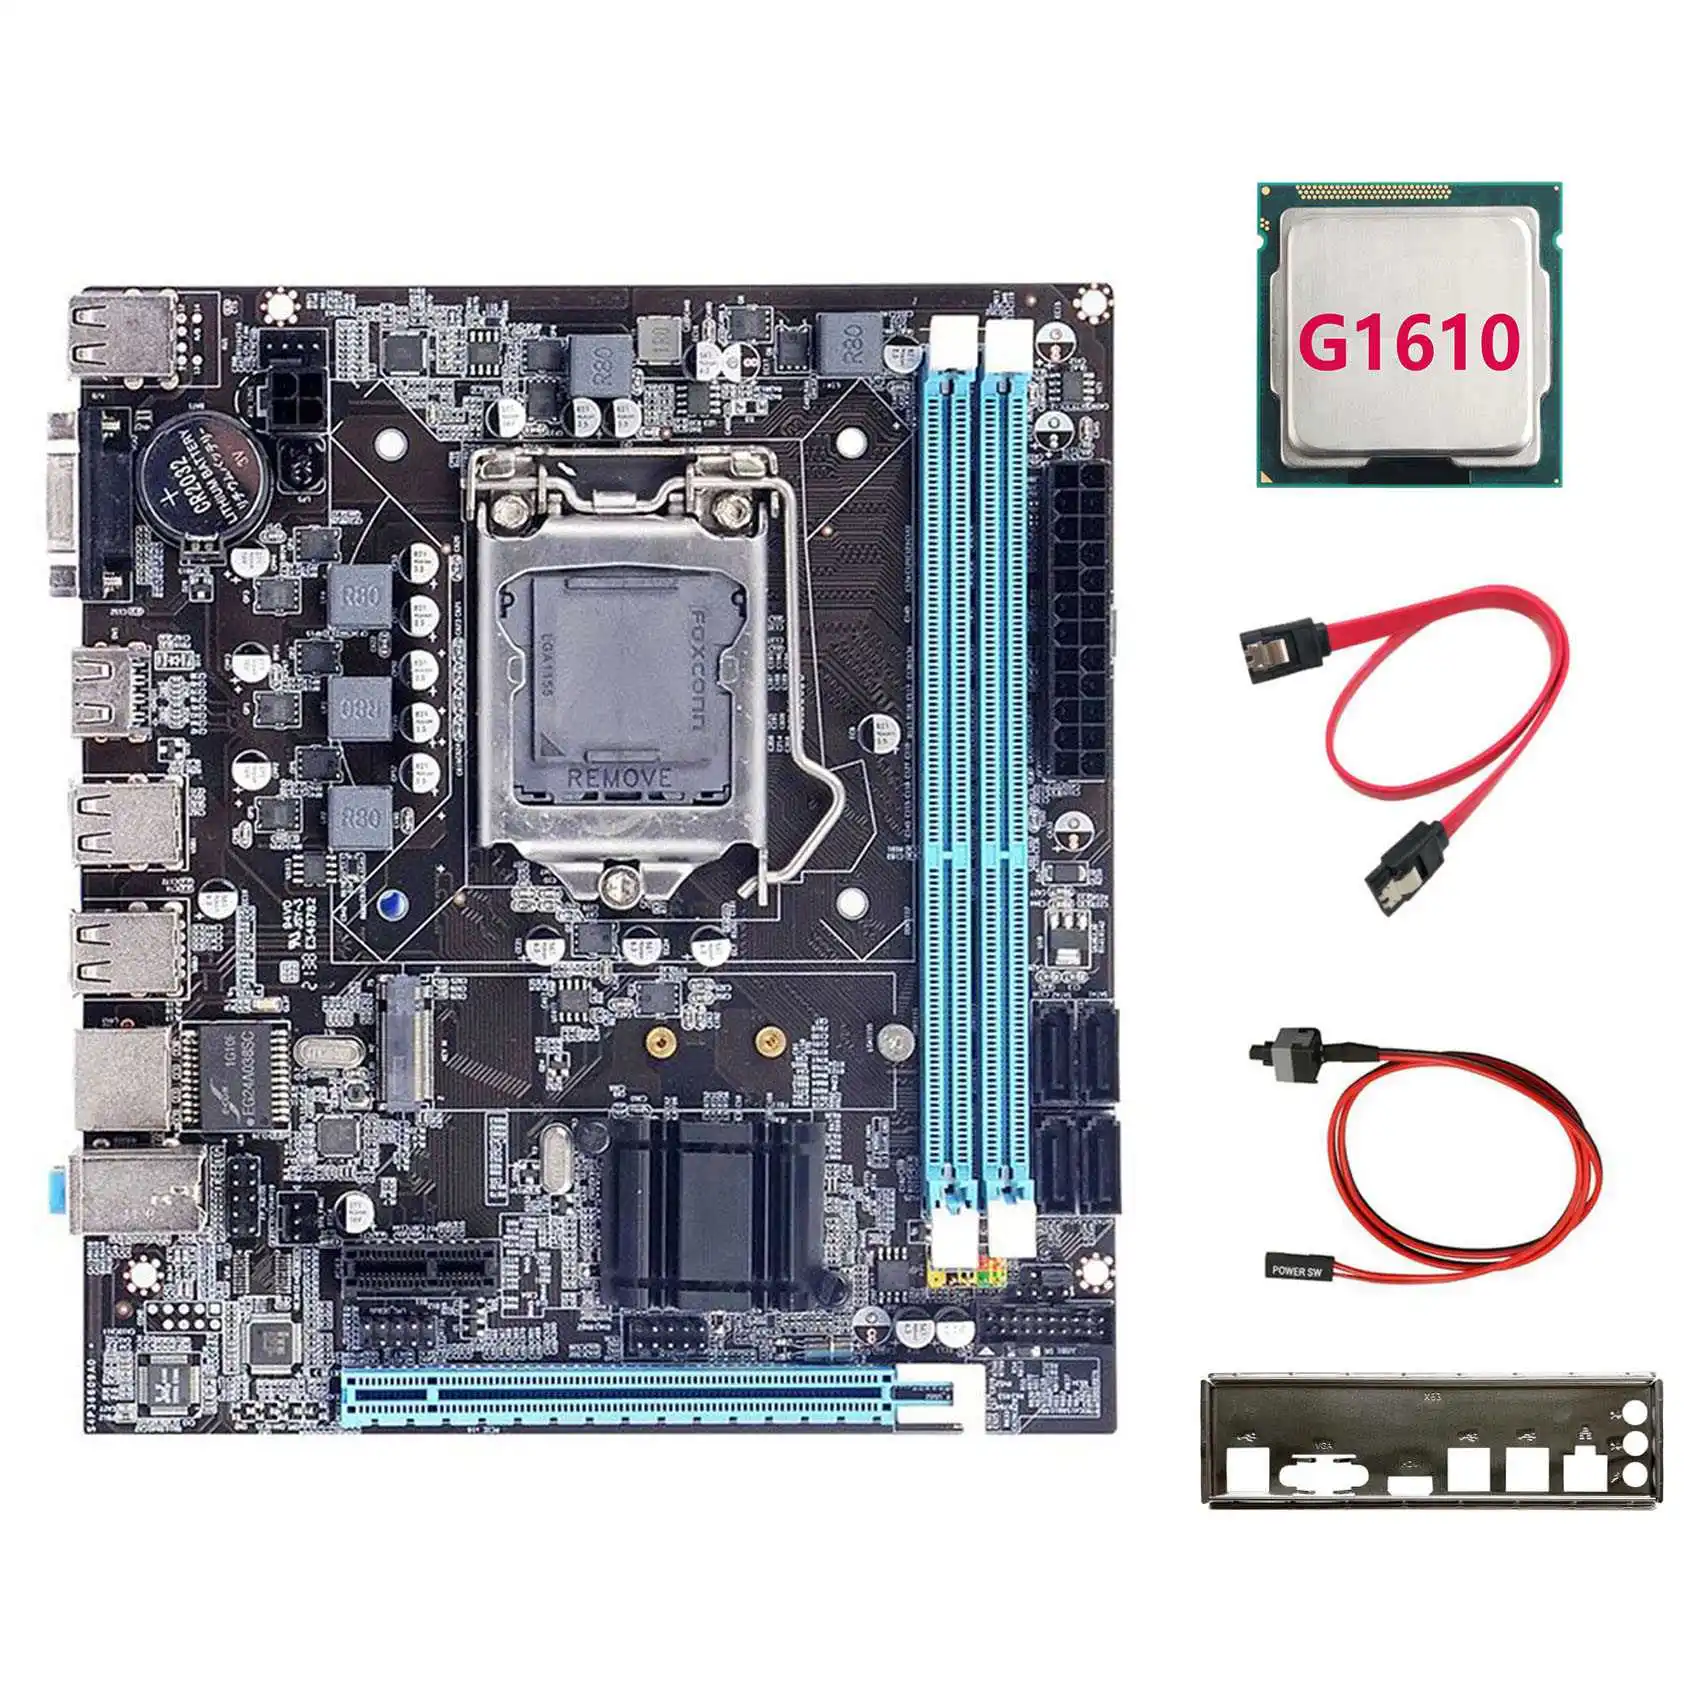 

H61 Motherboard+G1610 CPU+SATA Cable+Switch Cable+Baffle LGA1155 M.2 NVME DDR3 for Office for PUBG CF LOL Motherboard